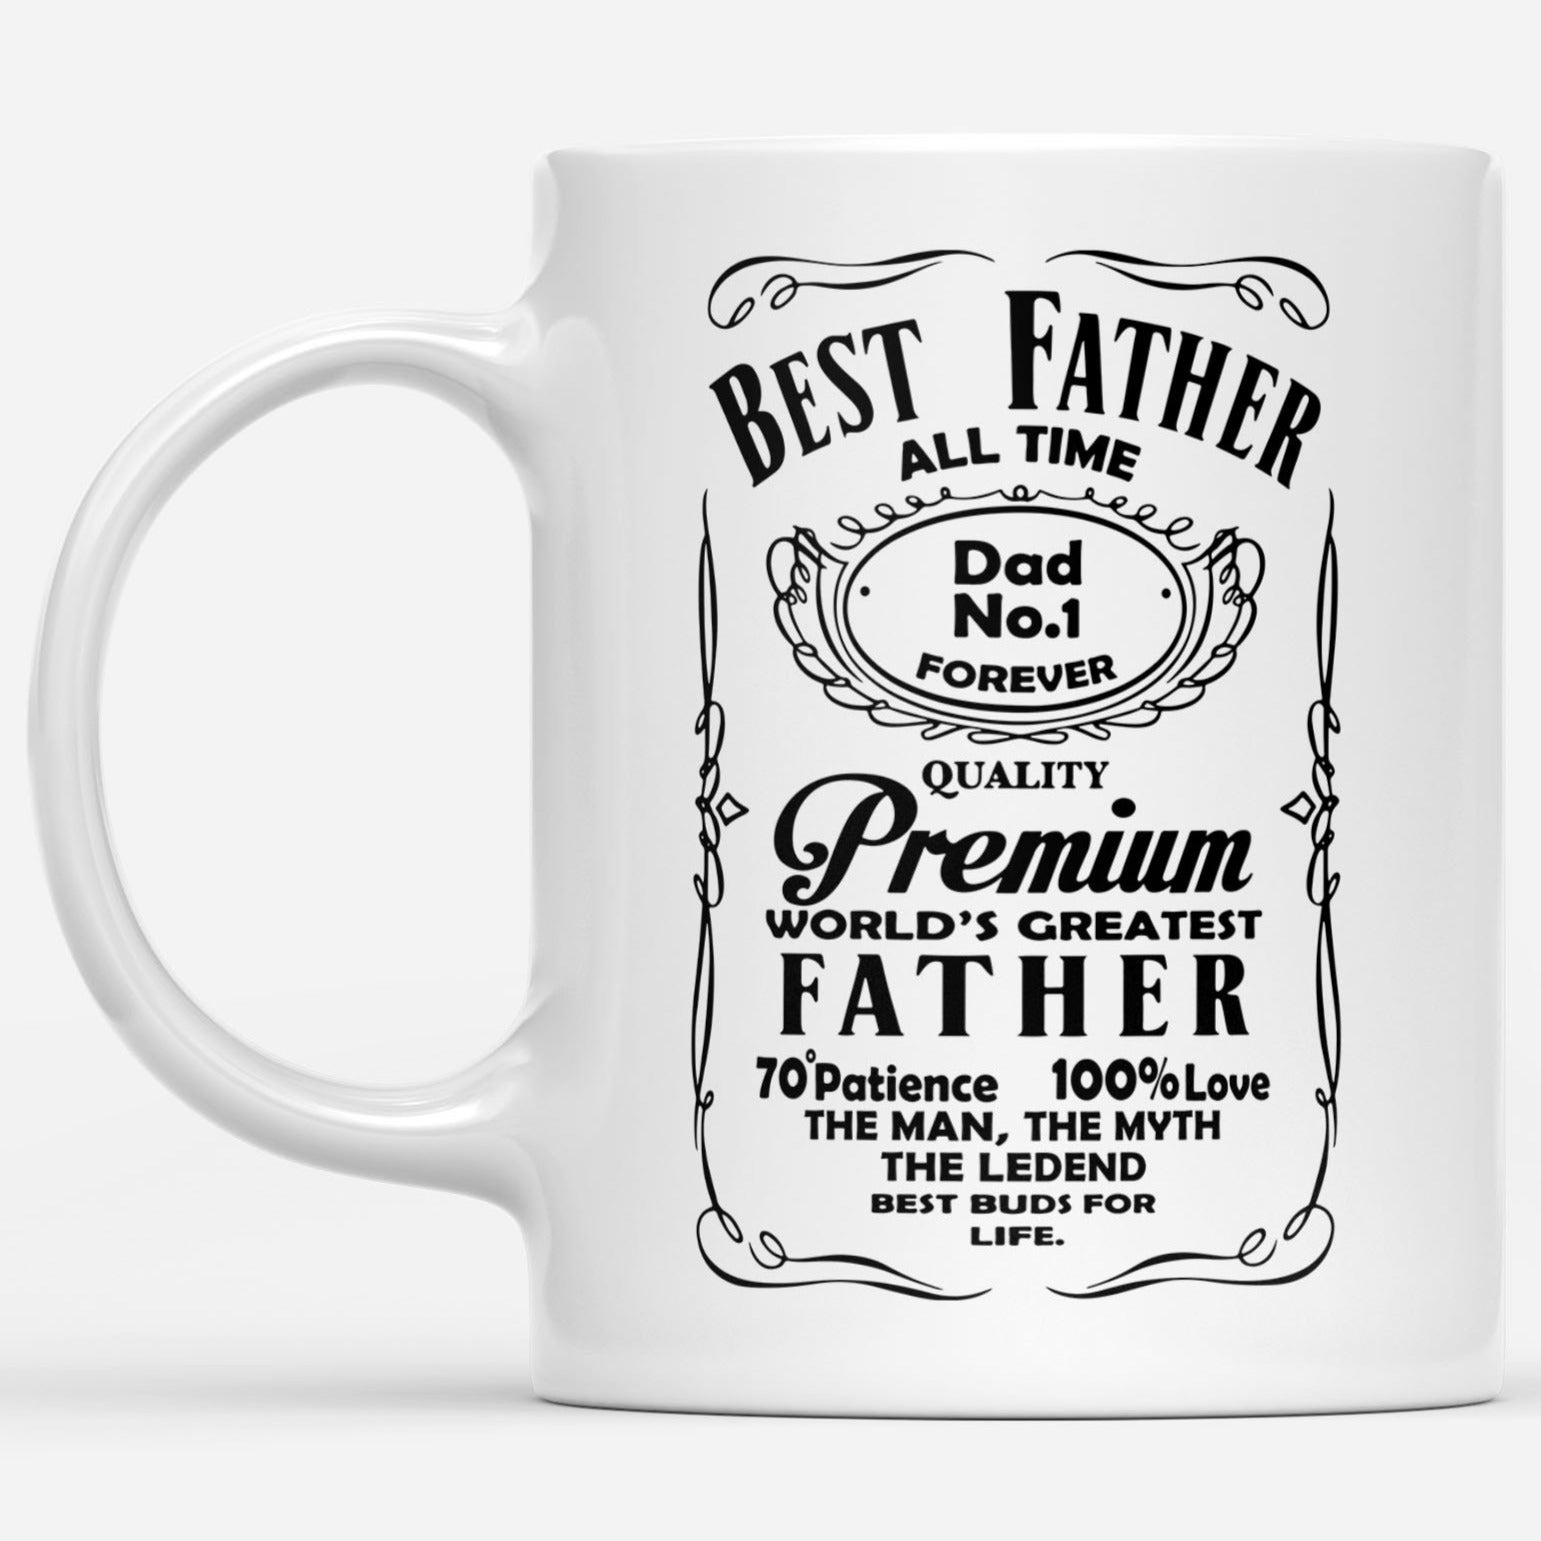 Best Father All Time Dad No 1 Forever Funny Gift Ideas for Dad Fathers Day DS White Mug